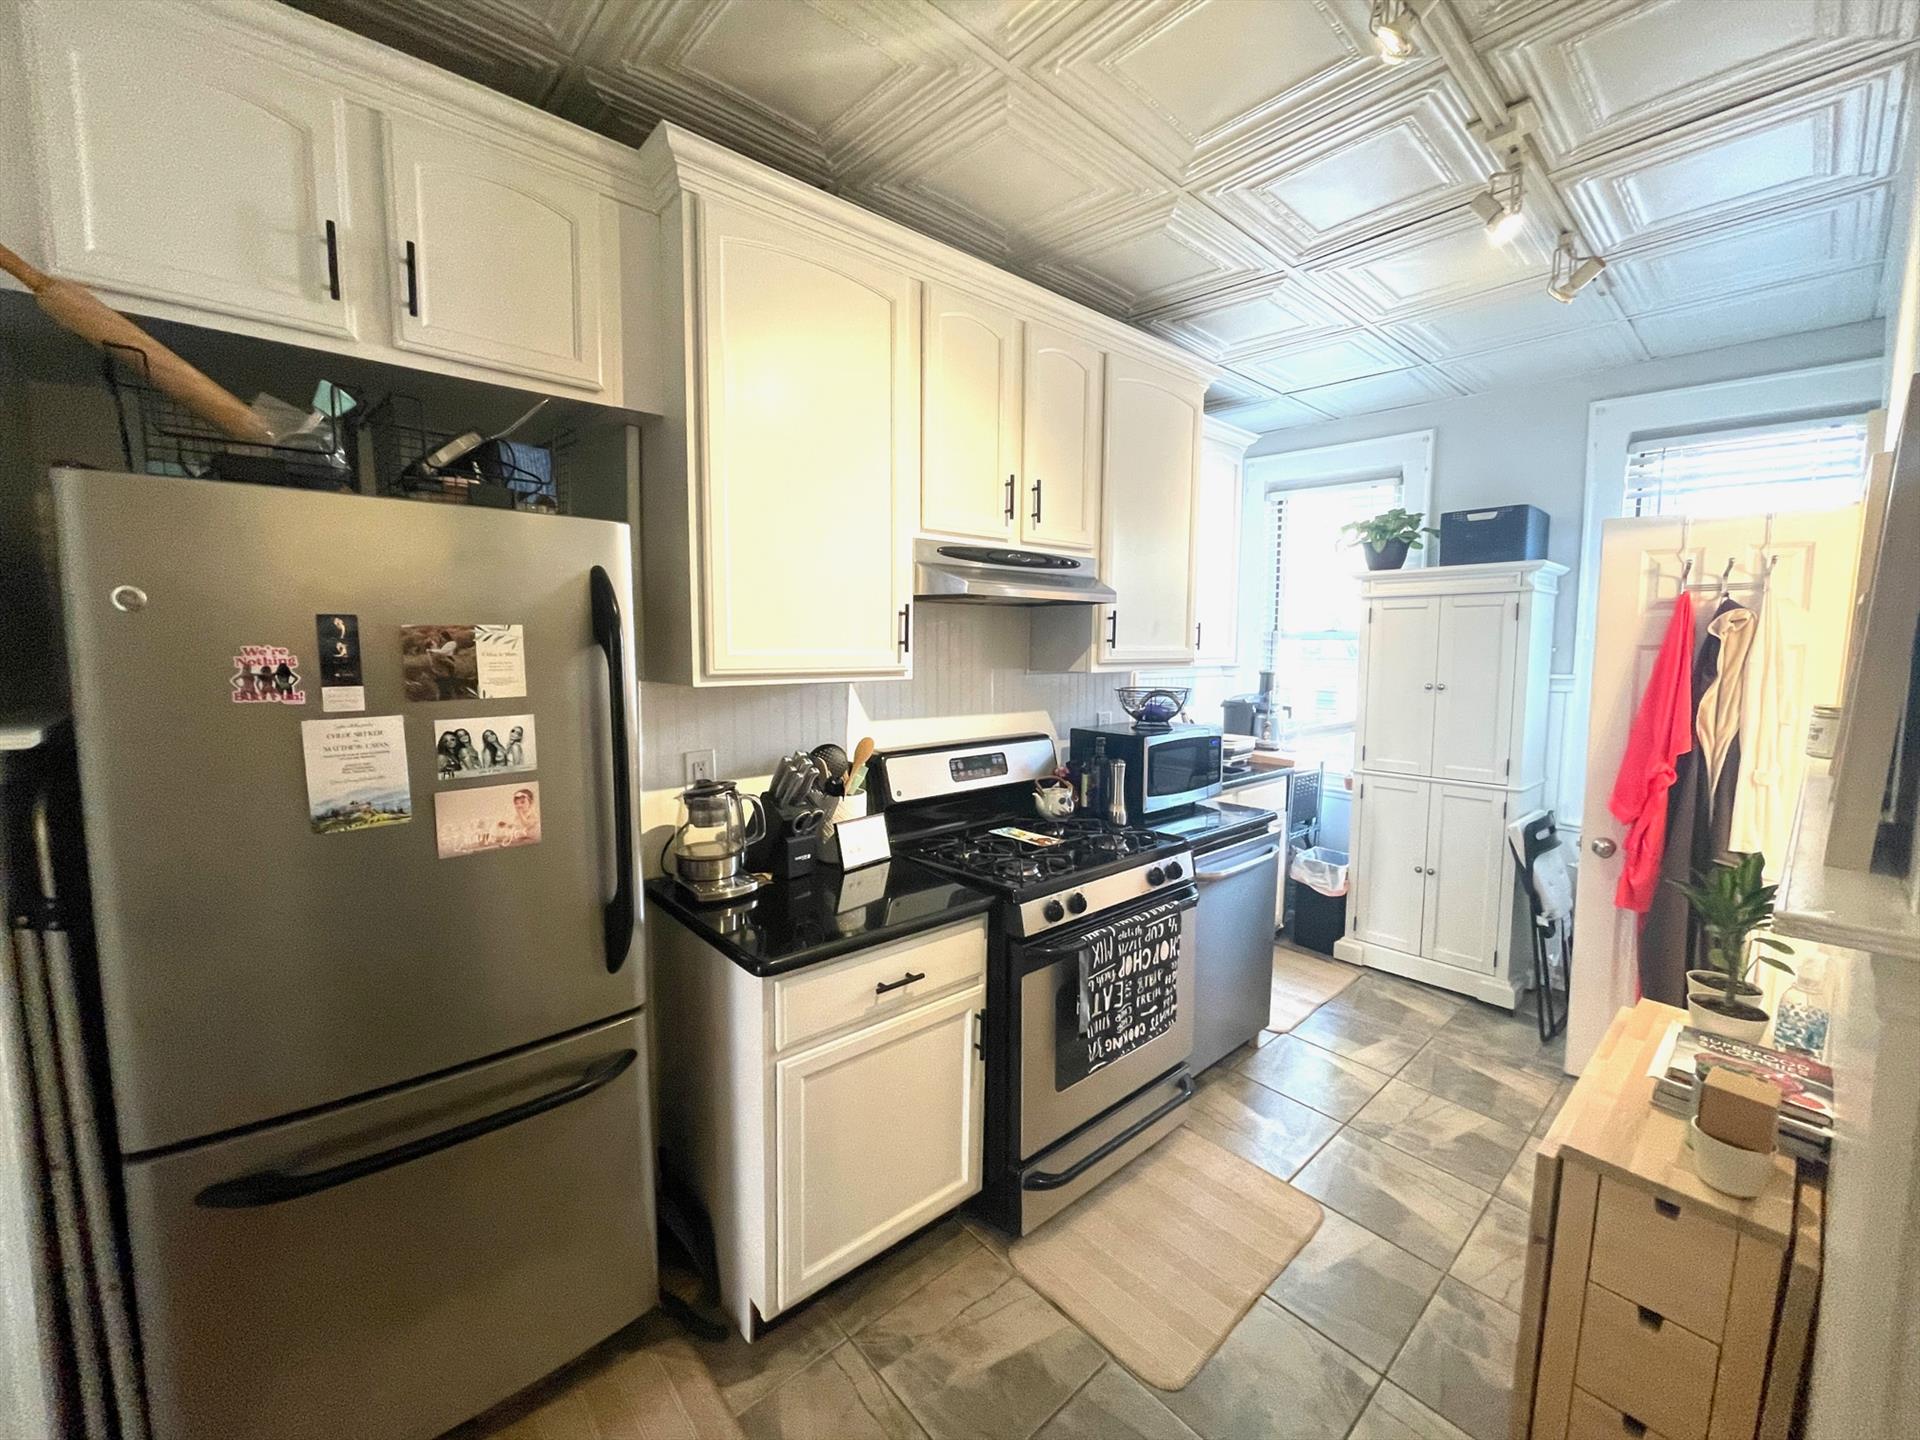 Beautiful one bedroom in the heart of Hoboken! Unit features nice spacious bedroom, hardwood floors, stainless steel appliances including dishwasher! Unit is available between 8/1 - 9/1. Tenant pays broker fee of 10% of annual rent.